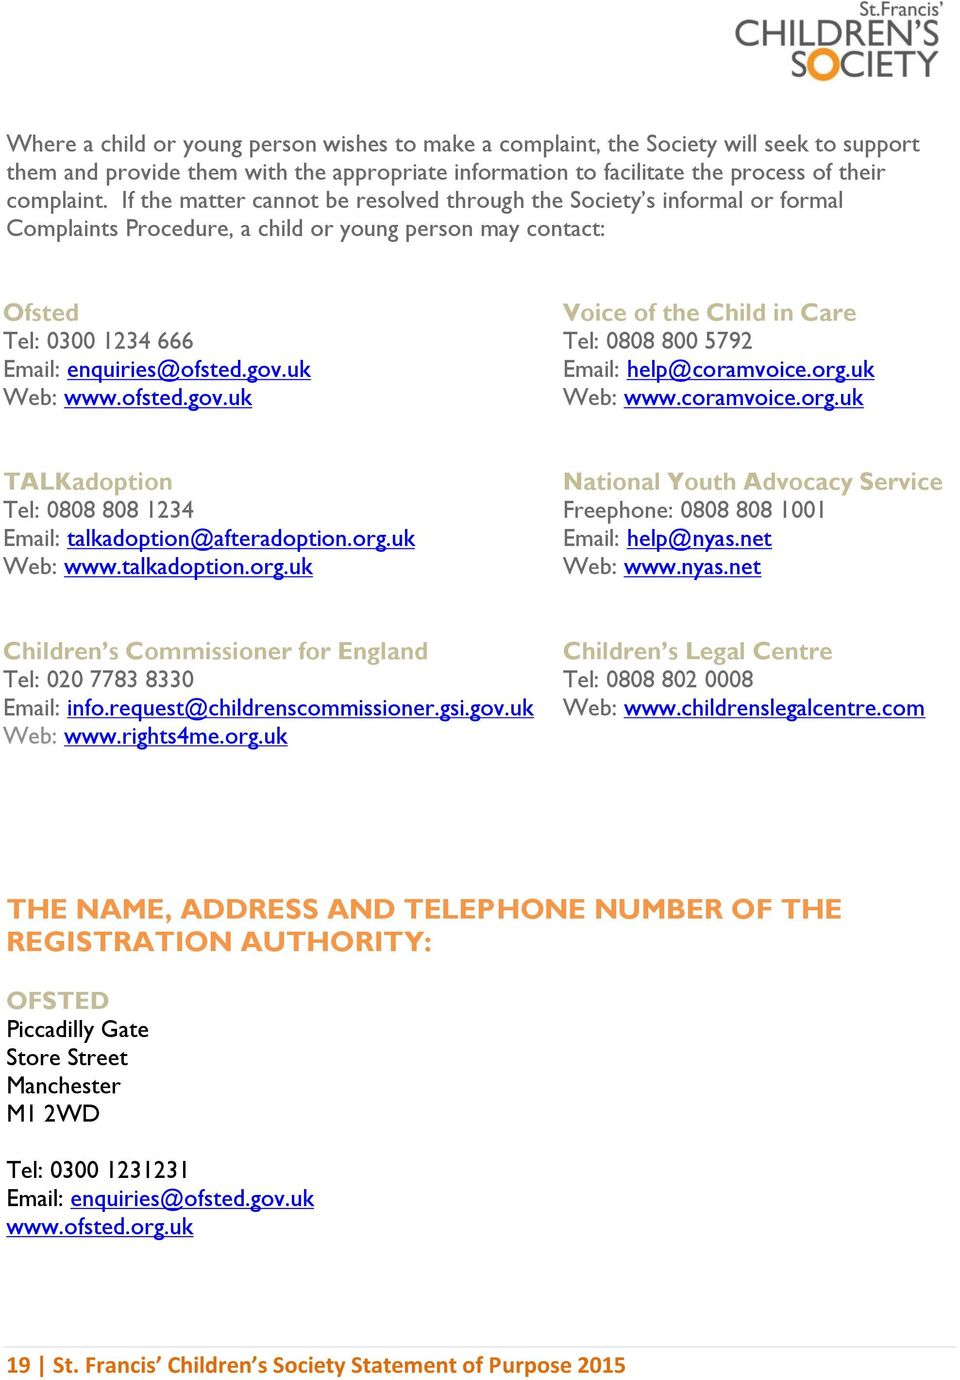 ofsted.gov.uk Voice of the Child in Care Tel: 0808 800 5792 Email: help@coramvoice.org.uk Web: www.coramvoice.org.uk TALKadoption Tel: 0808 808 1234 Email: talkadoption@afteradoption.org.uk Web: www.talkadoption.org.uk National Youth Advocacy Service Freephone: 0808 808 1001 Email: help@nyas.